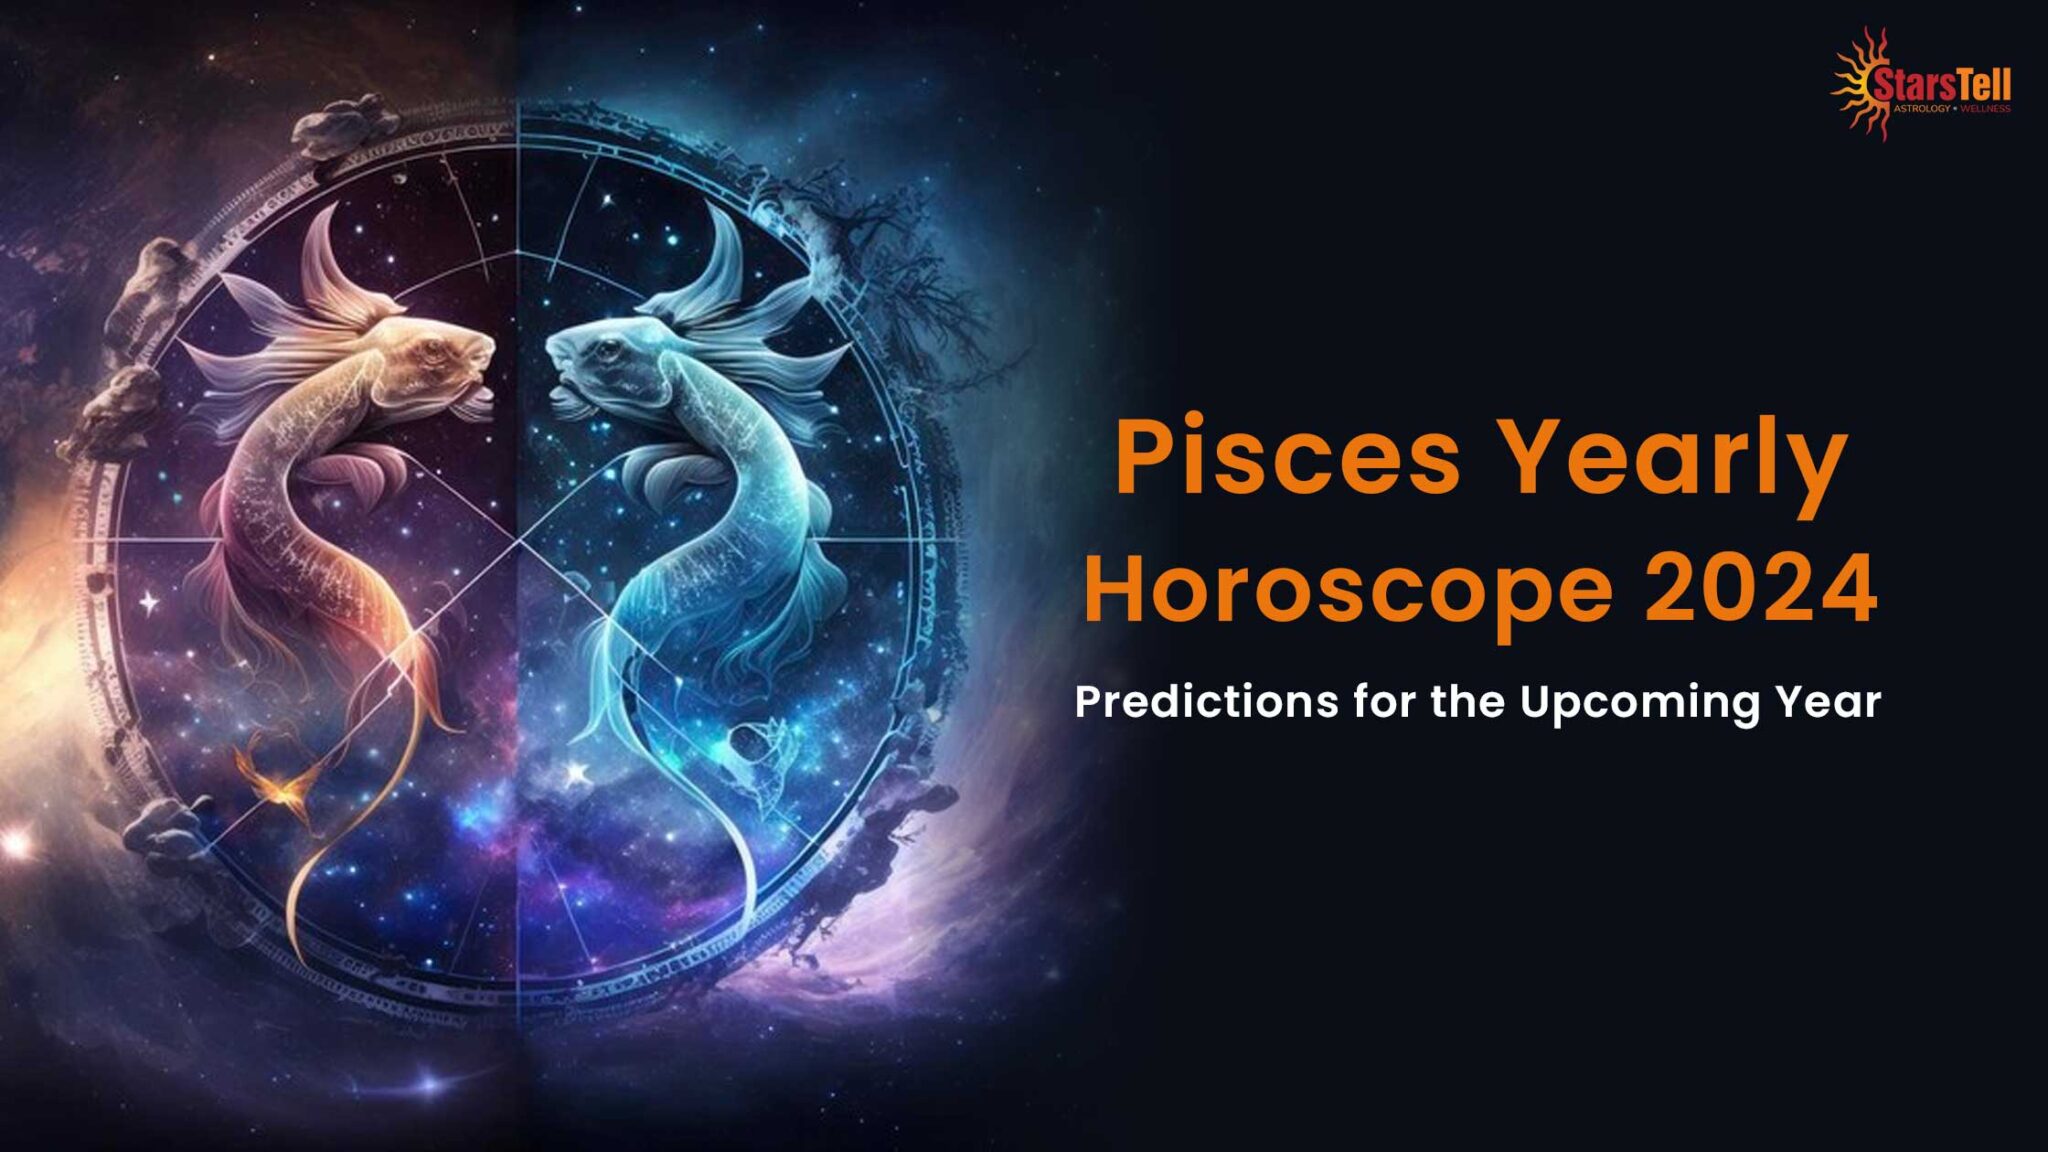 Pisces Yearly Horoscope 2024 Predictions for the Year